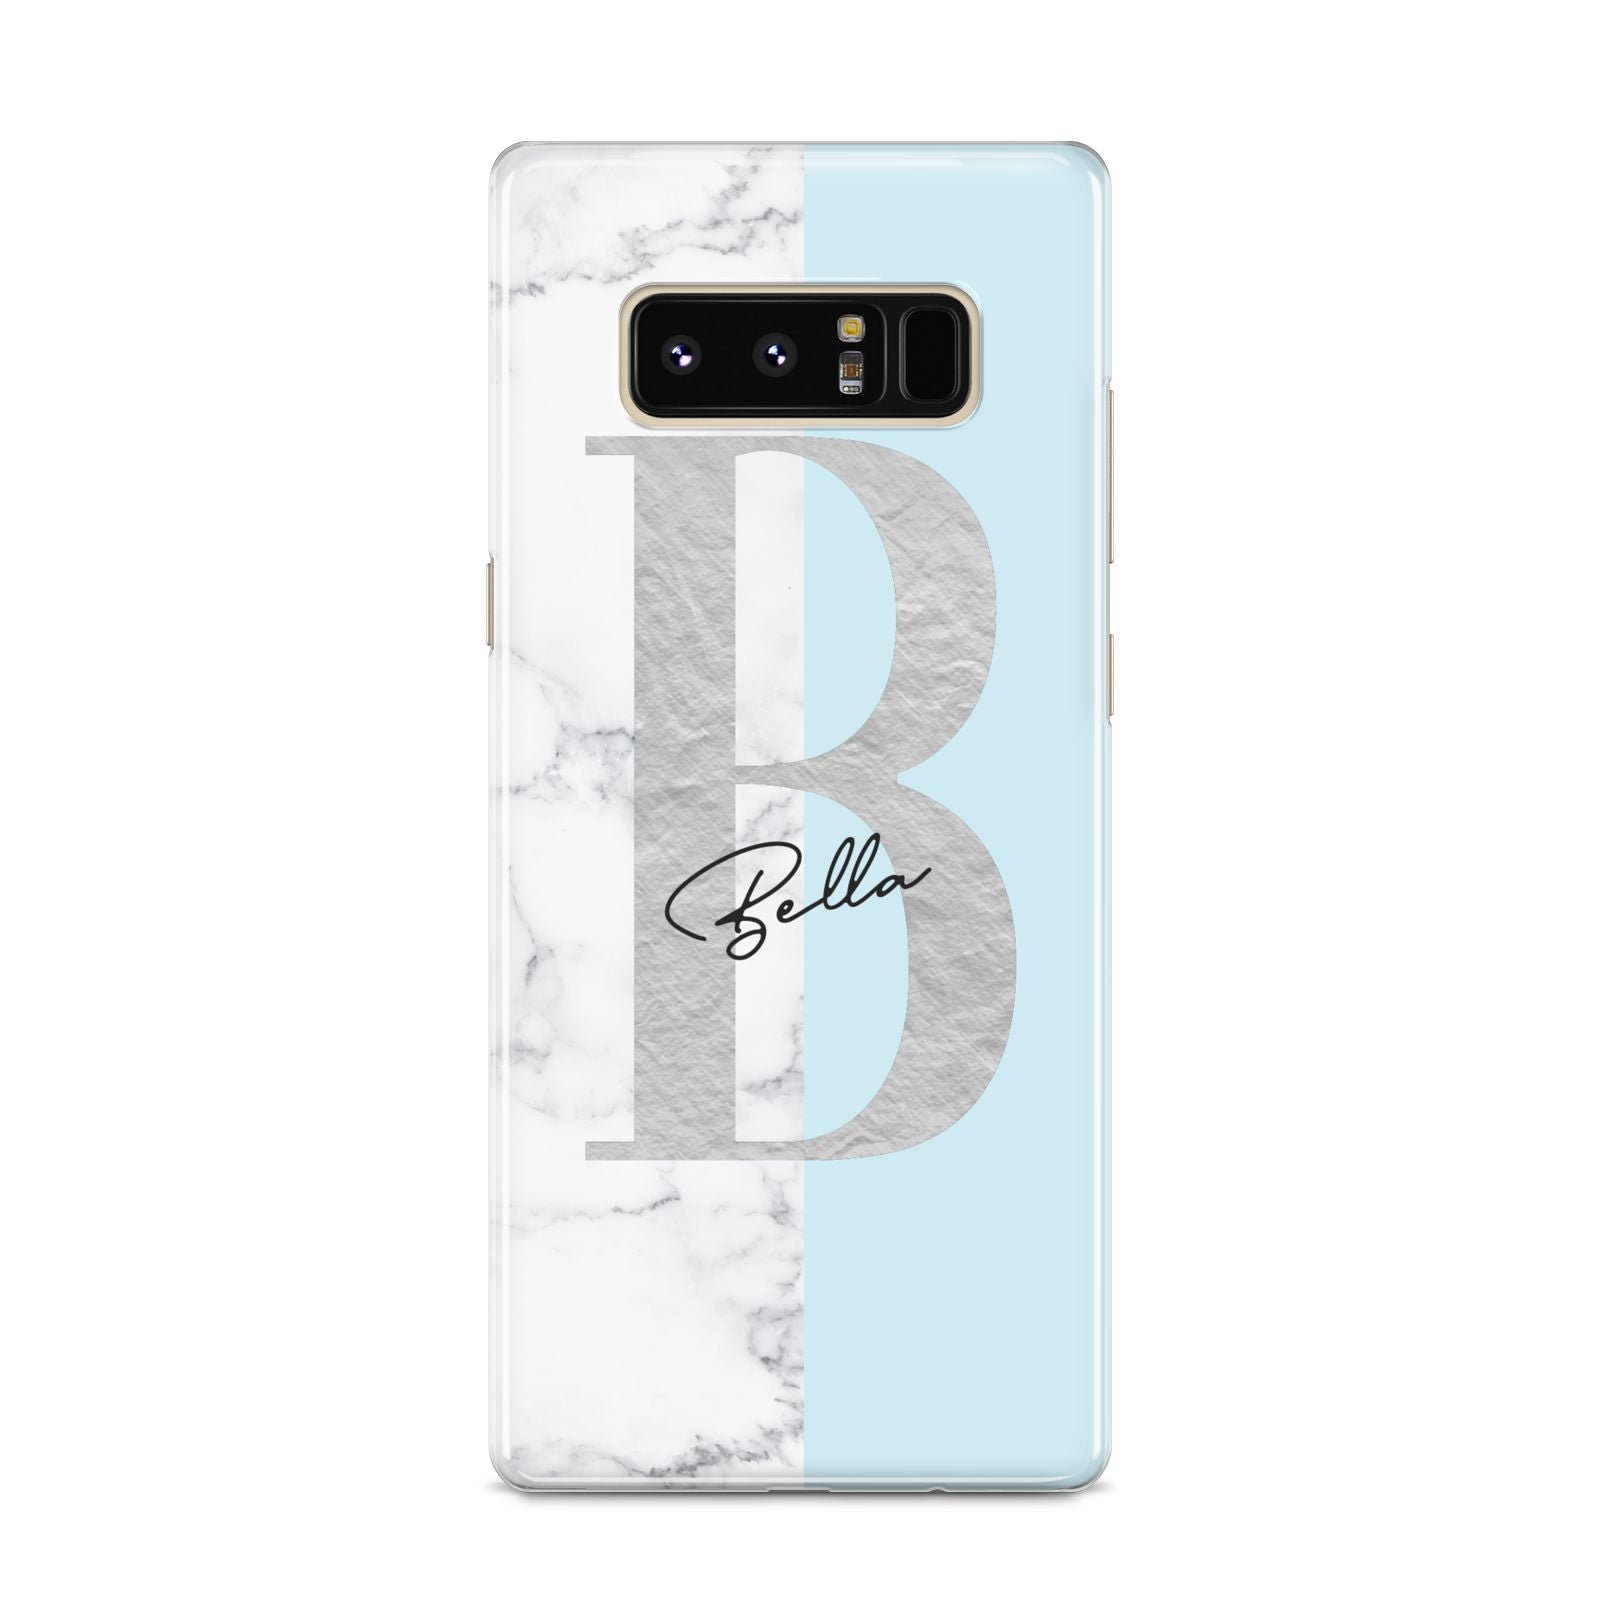 Personalised Chrome Marble Samsung Galaxy S8 Case